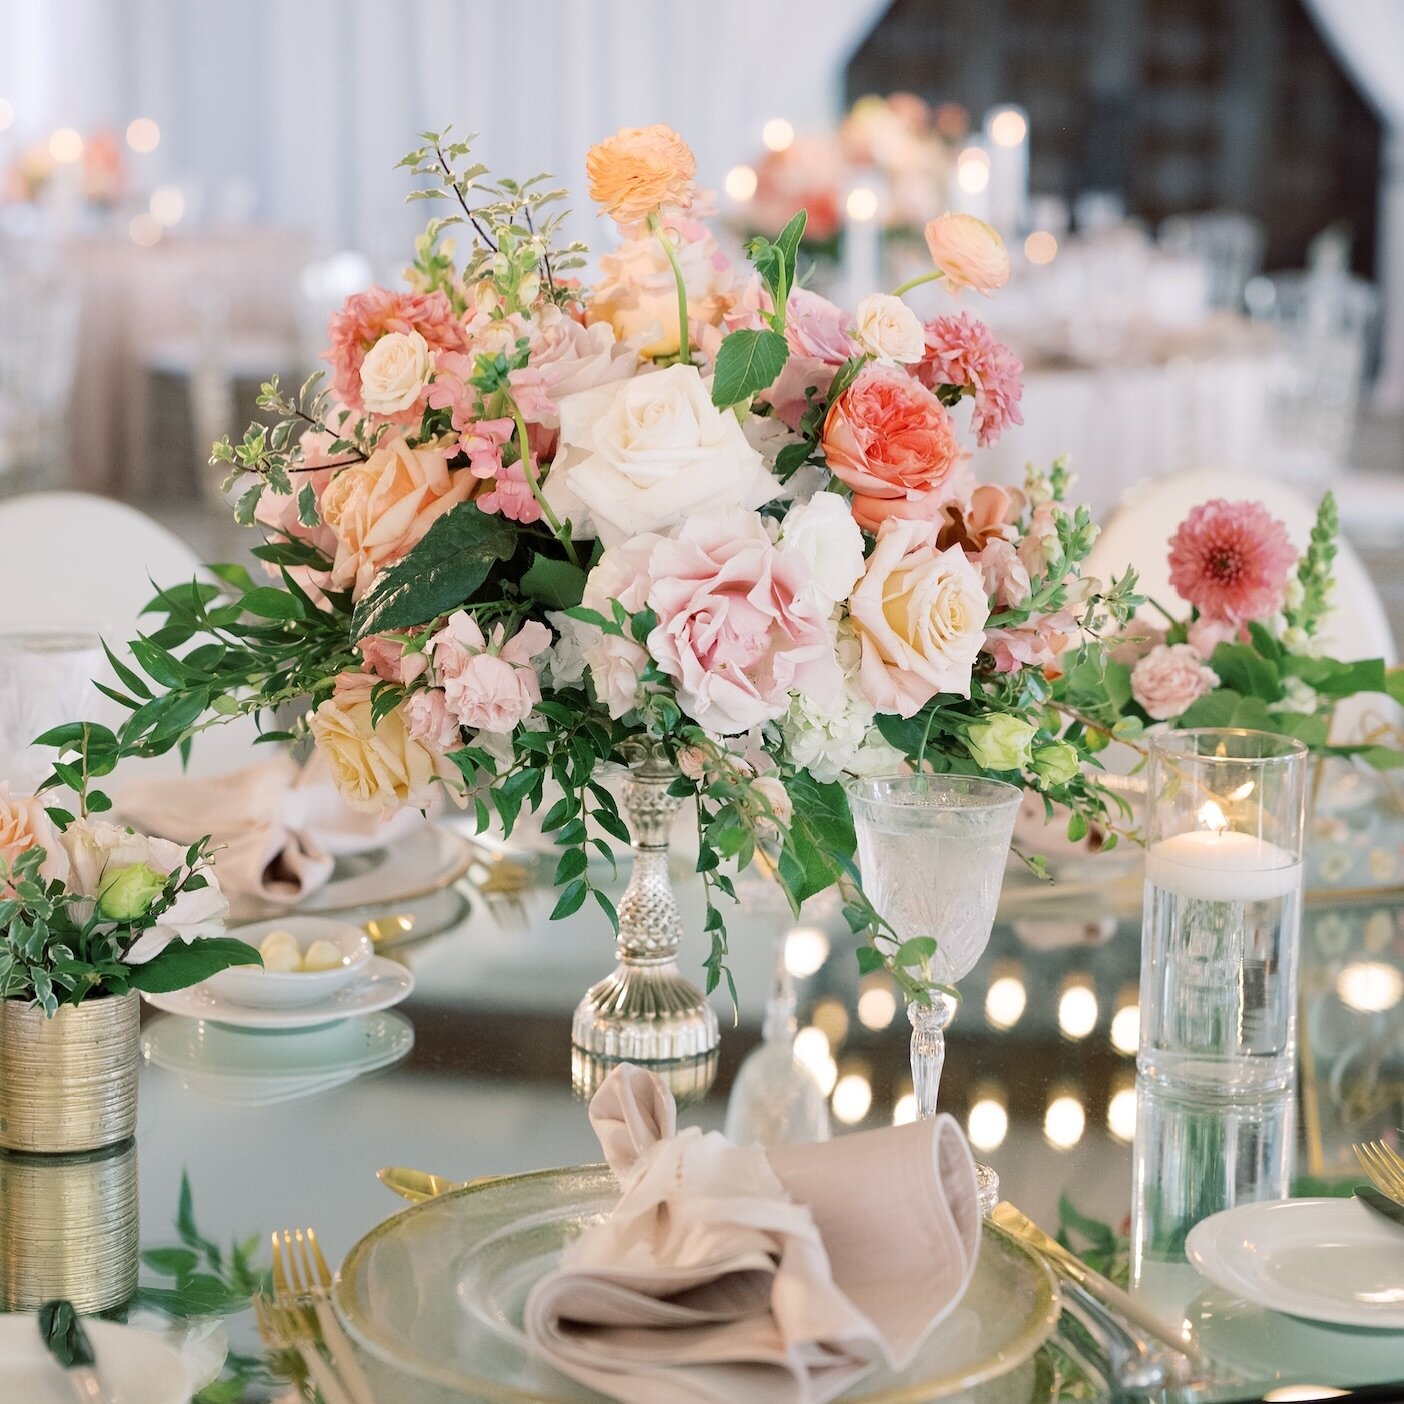 Spring has sprung and its time for the blooms to come out and play. Let&rsquo;s welcome the fresh start with open hearts and enjoy the beauty around us. Featured @stylemepretty
.
.
.
Vendor Credits on Frame:
Planner &amp; Design: @theblushingdetails
